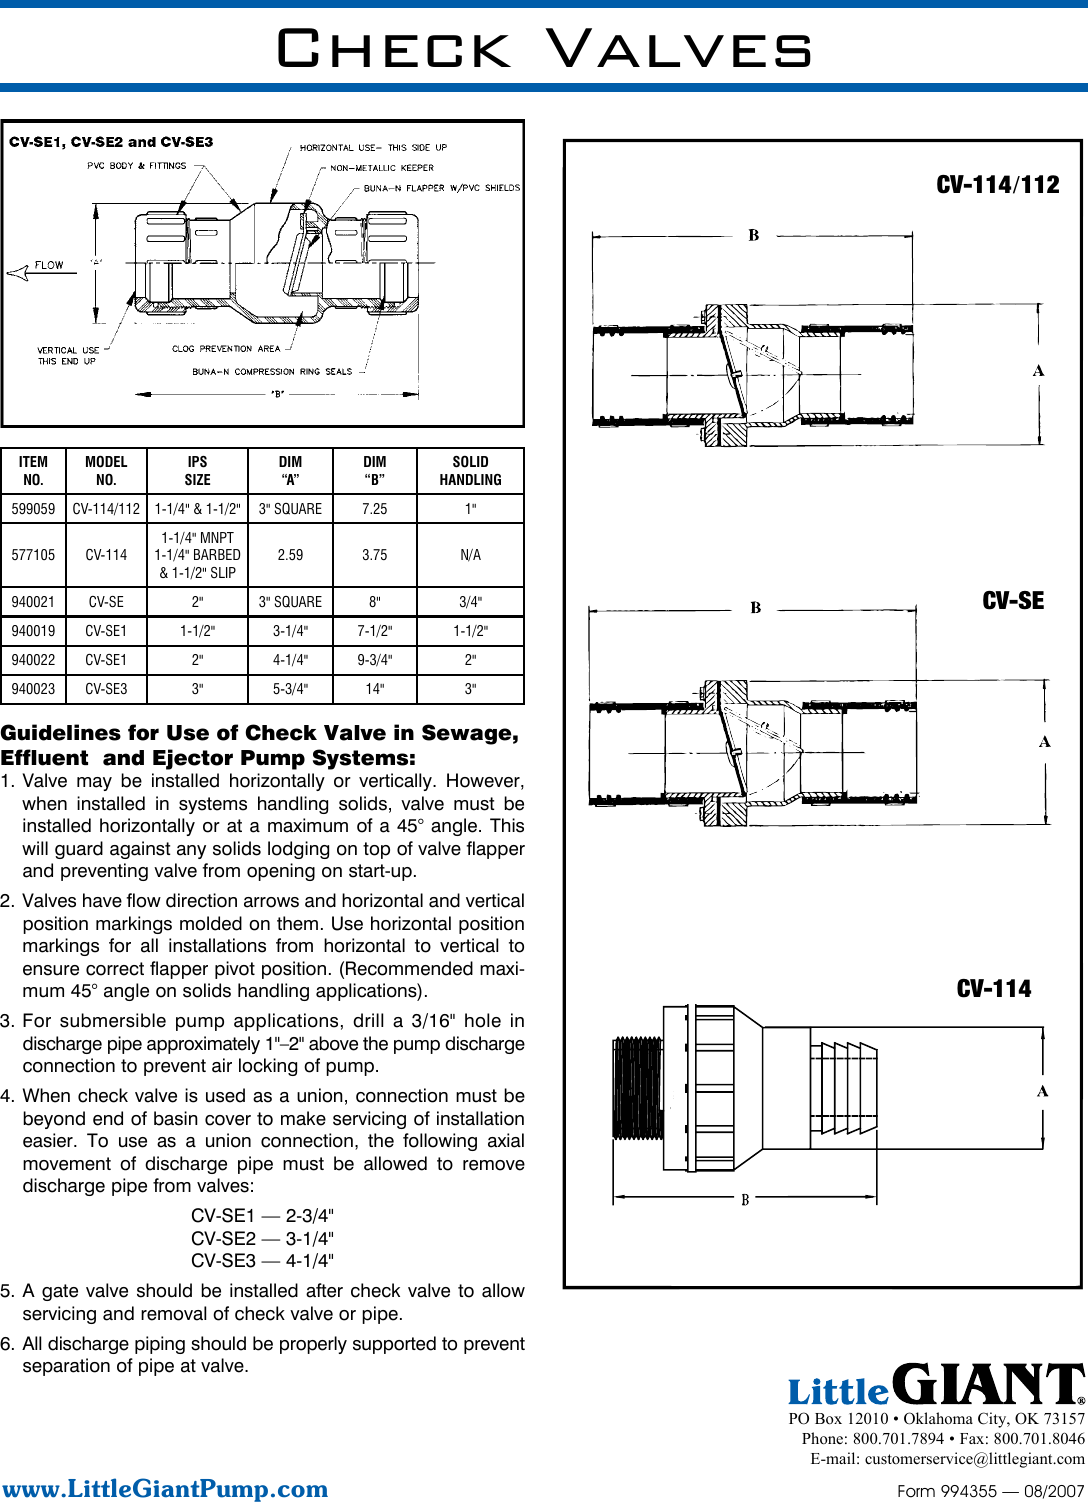 Page 2 of 2 - 20076 1 Little Giant 940021 Submittal User Manual